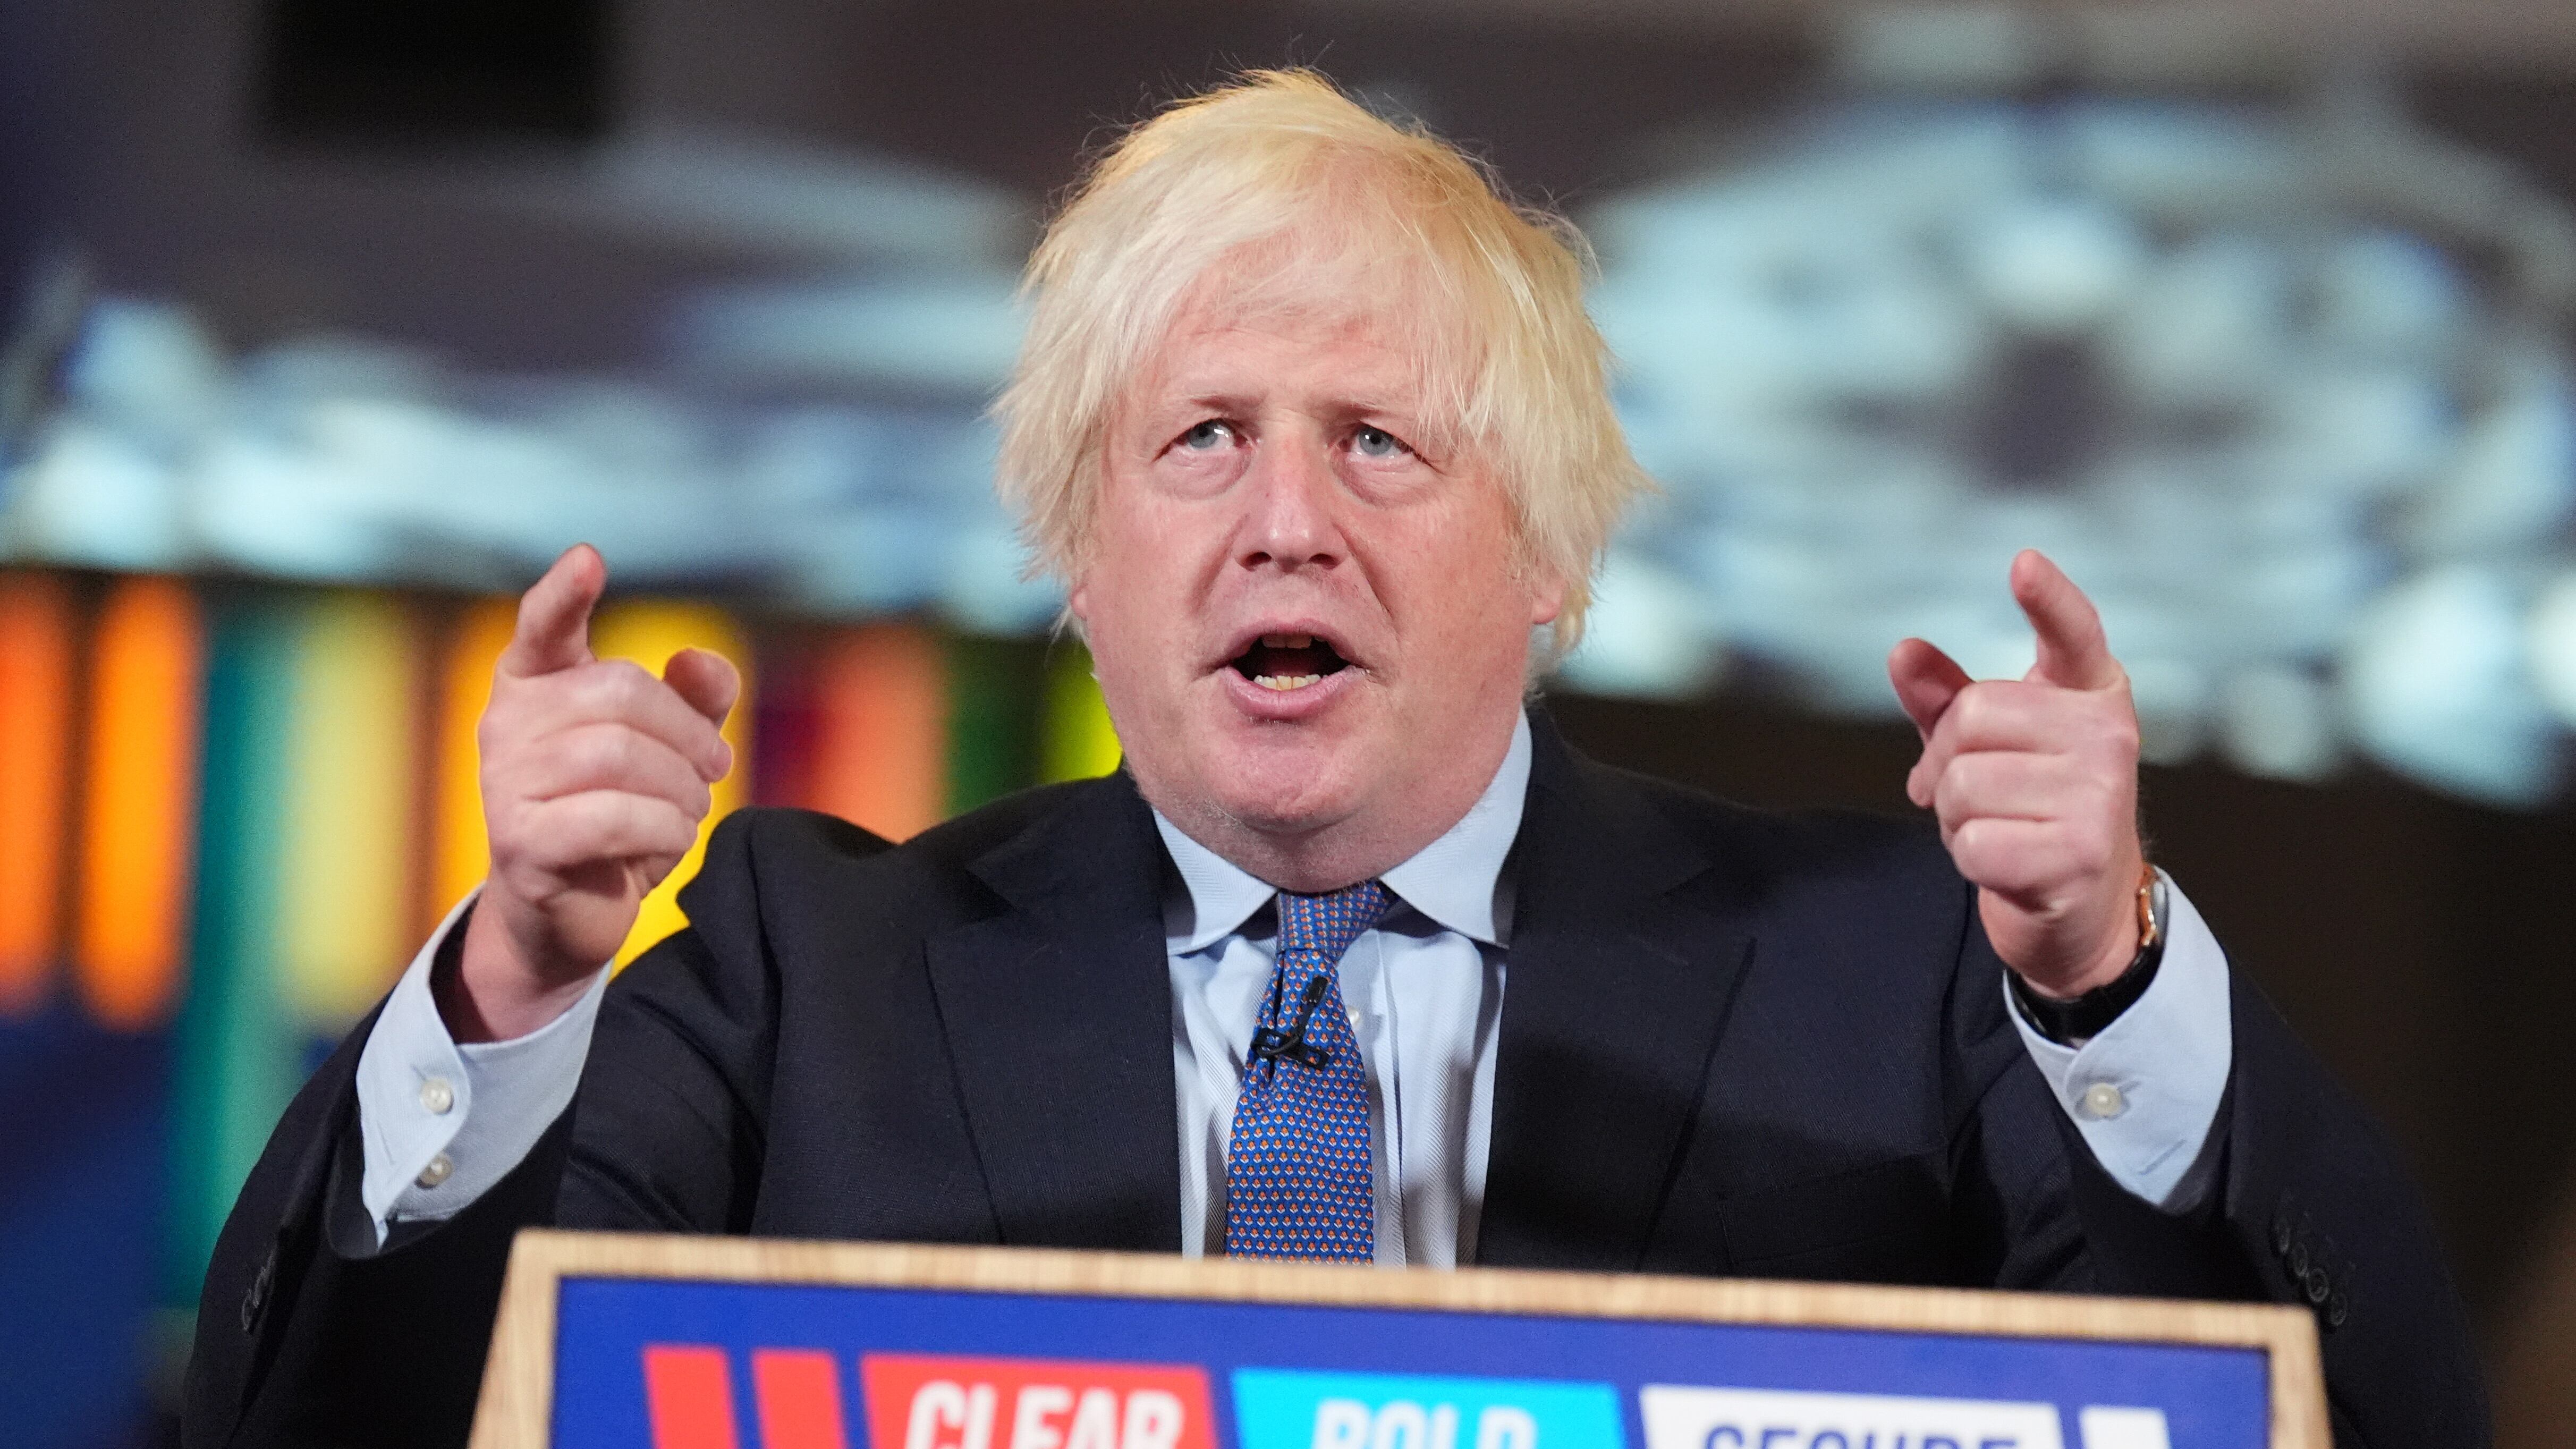 Boris Johnson delivers a speech in central London at a Conservative Party campaign event